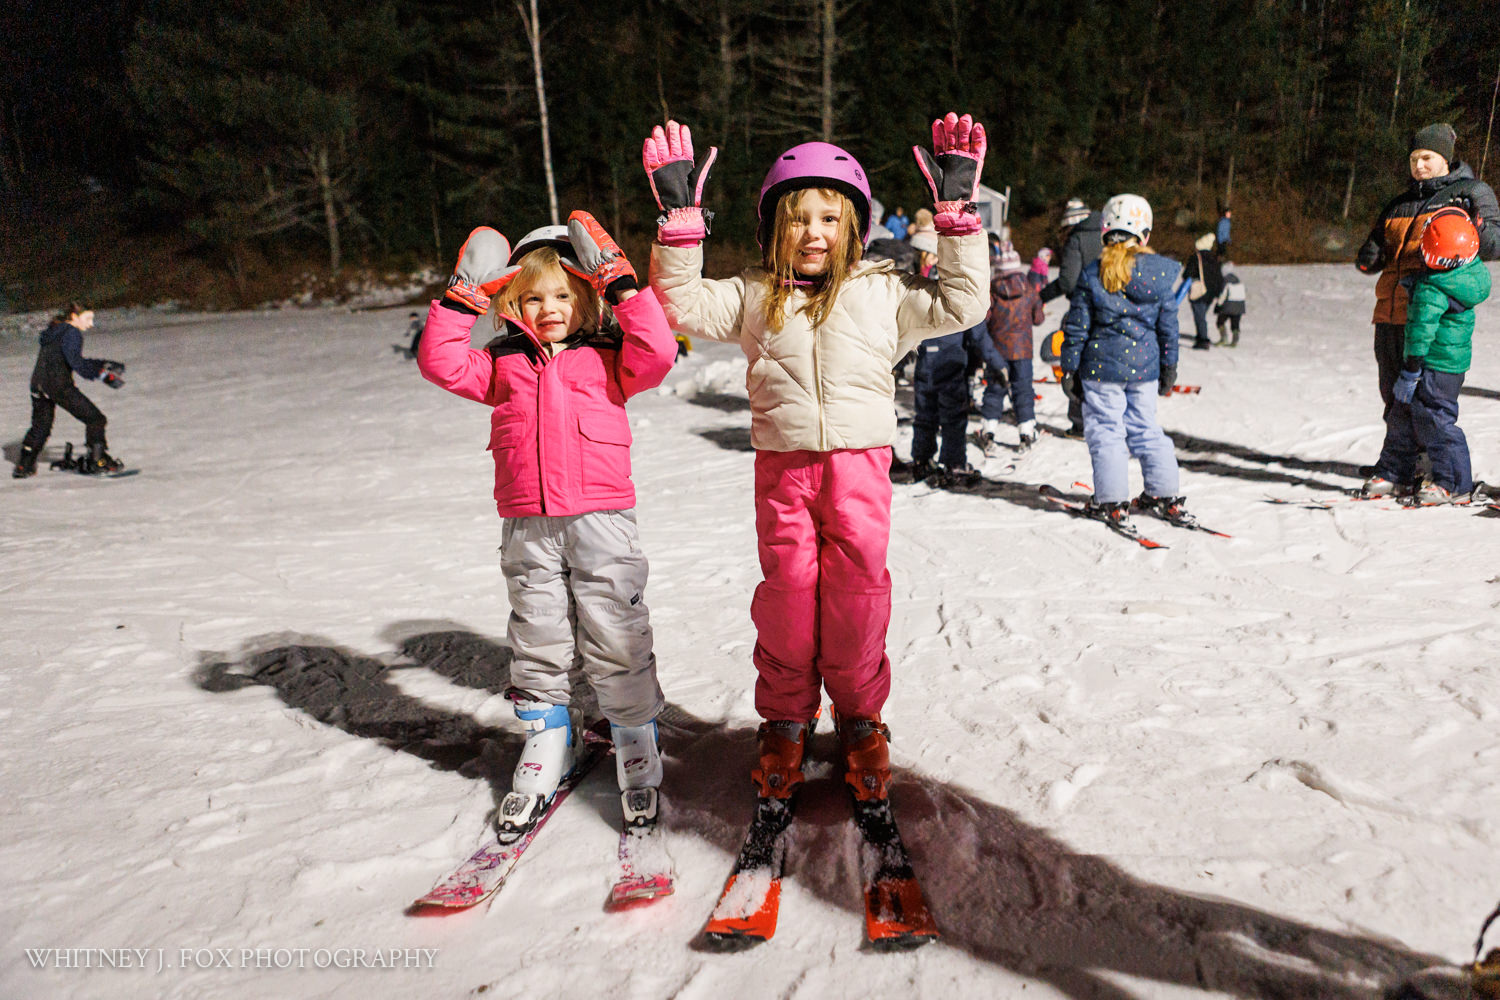 671 winter kids welcome to winter 2022 lost valley auburn maine documentary event photographer whitney j fox 4022 w